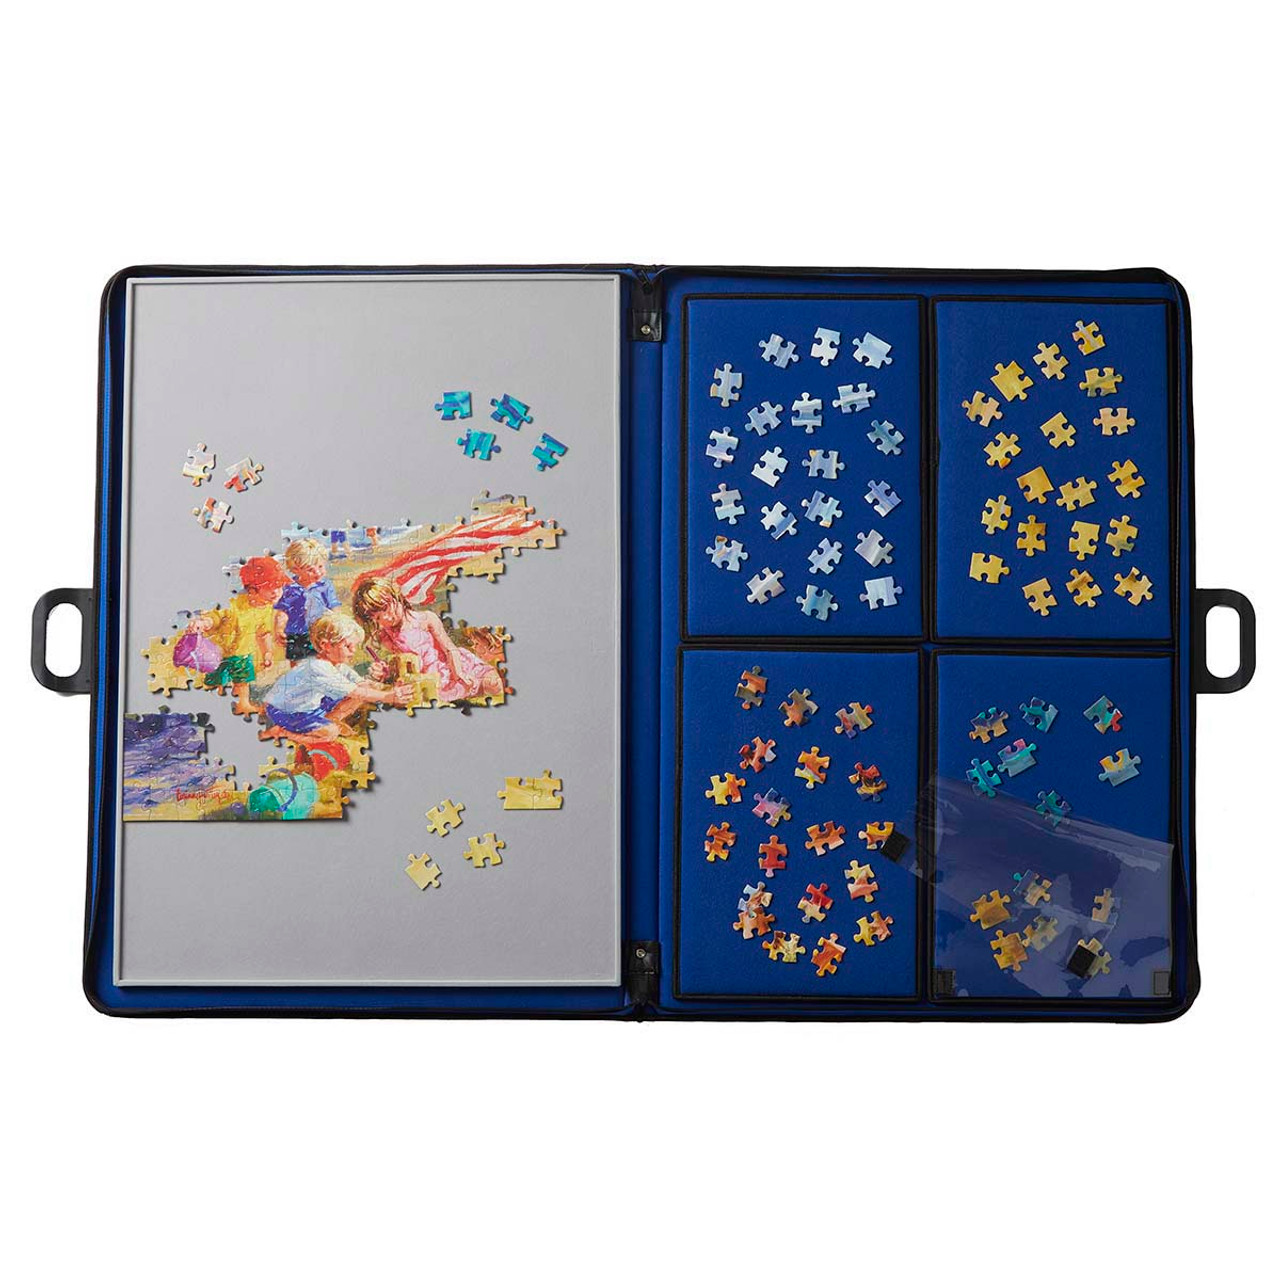 Jumbo Porta-Puzzle Caddy - Buy a Puzzle Caddy